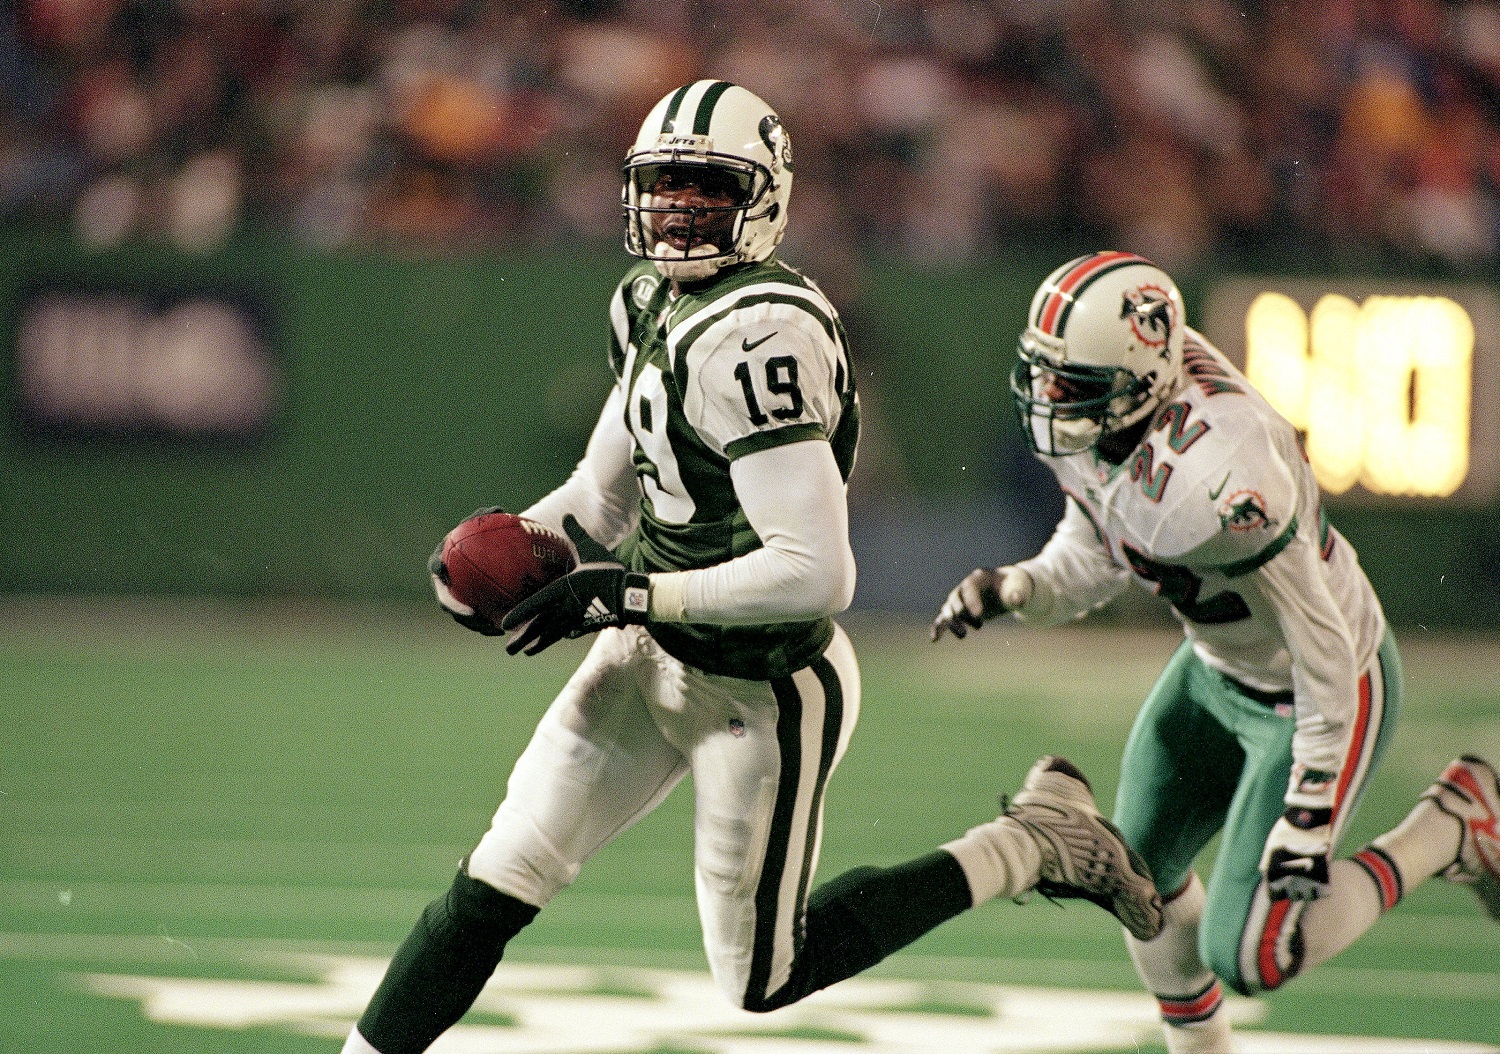 ESPN analyst Keyshawn Johnson began his NFL career with the New York Jets after being drafted No. 1 overall.